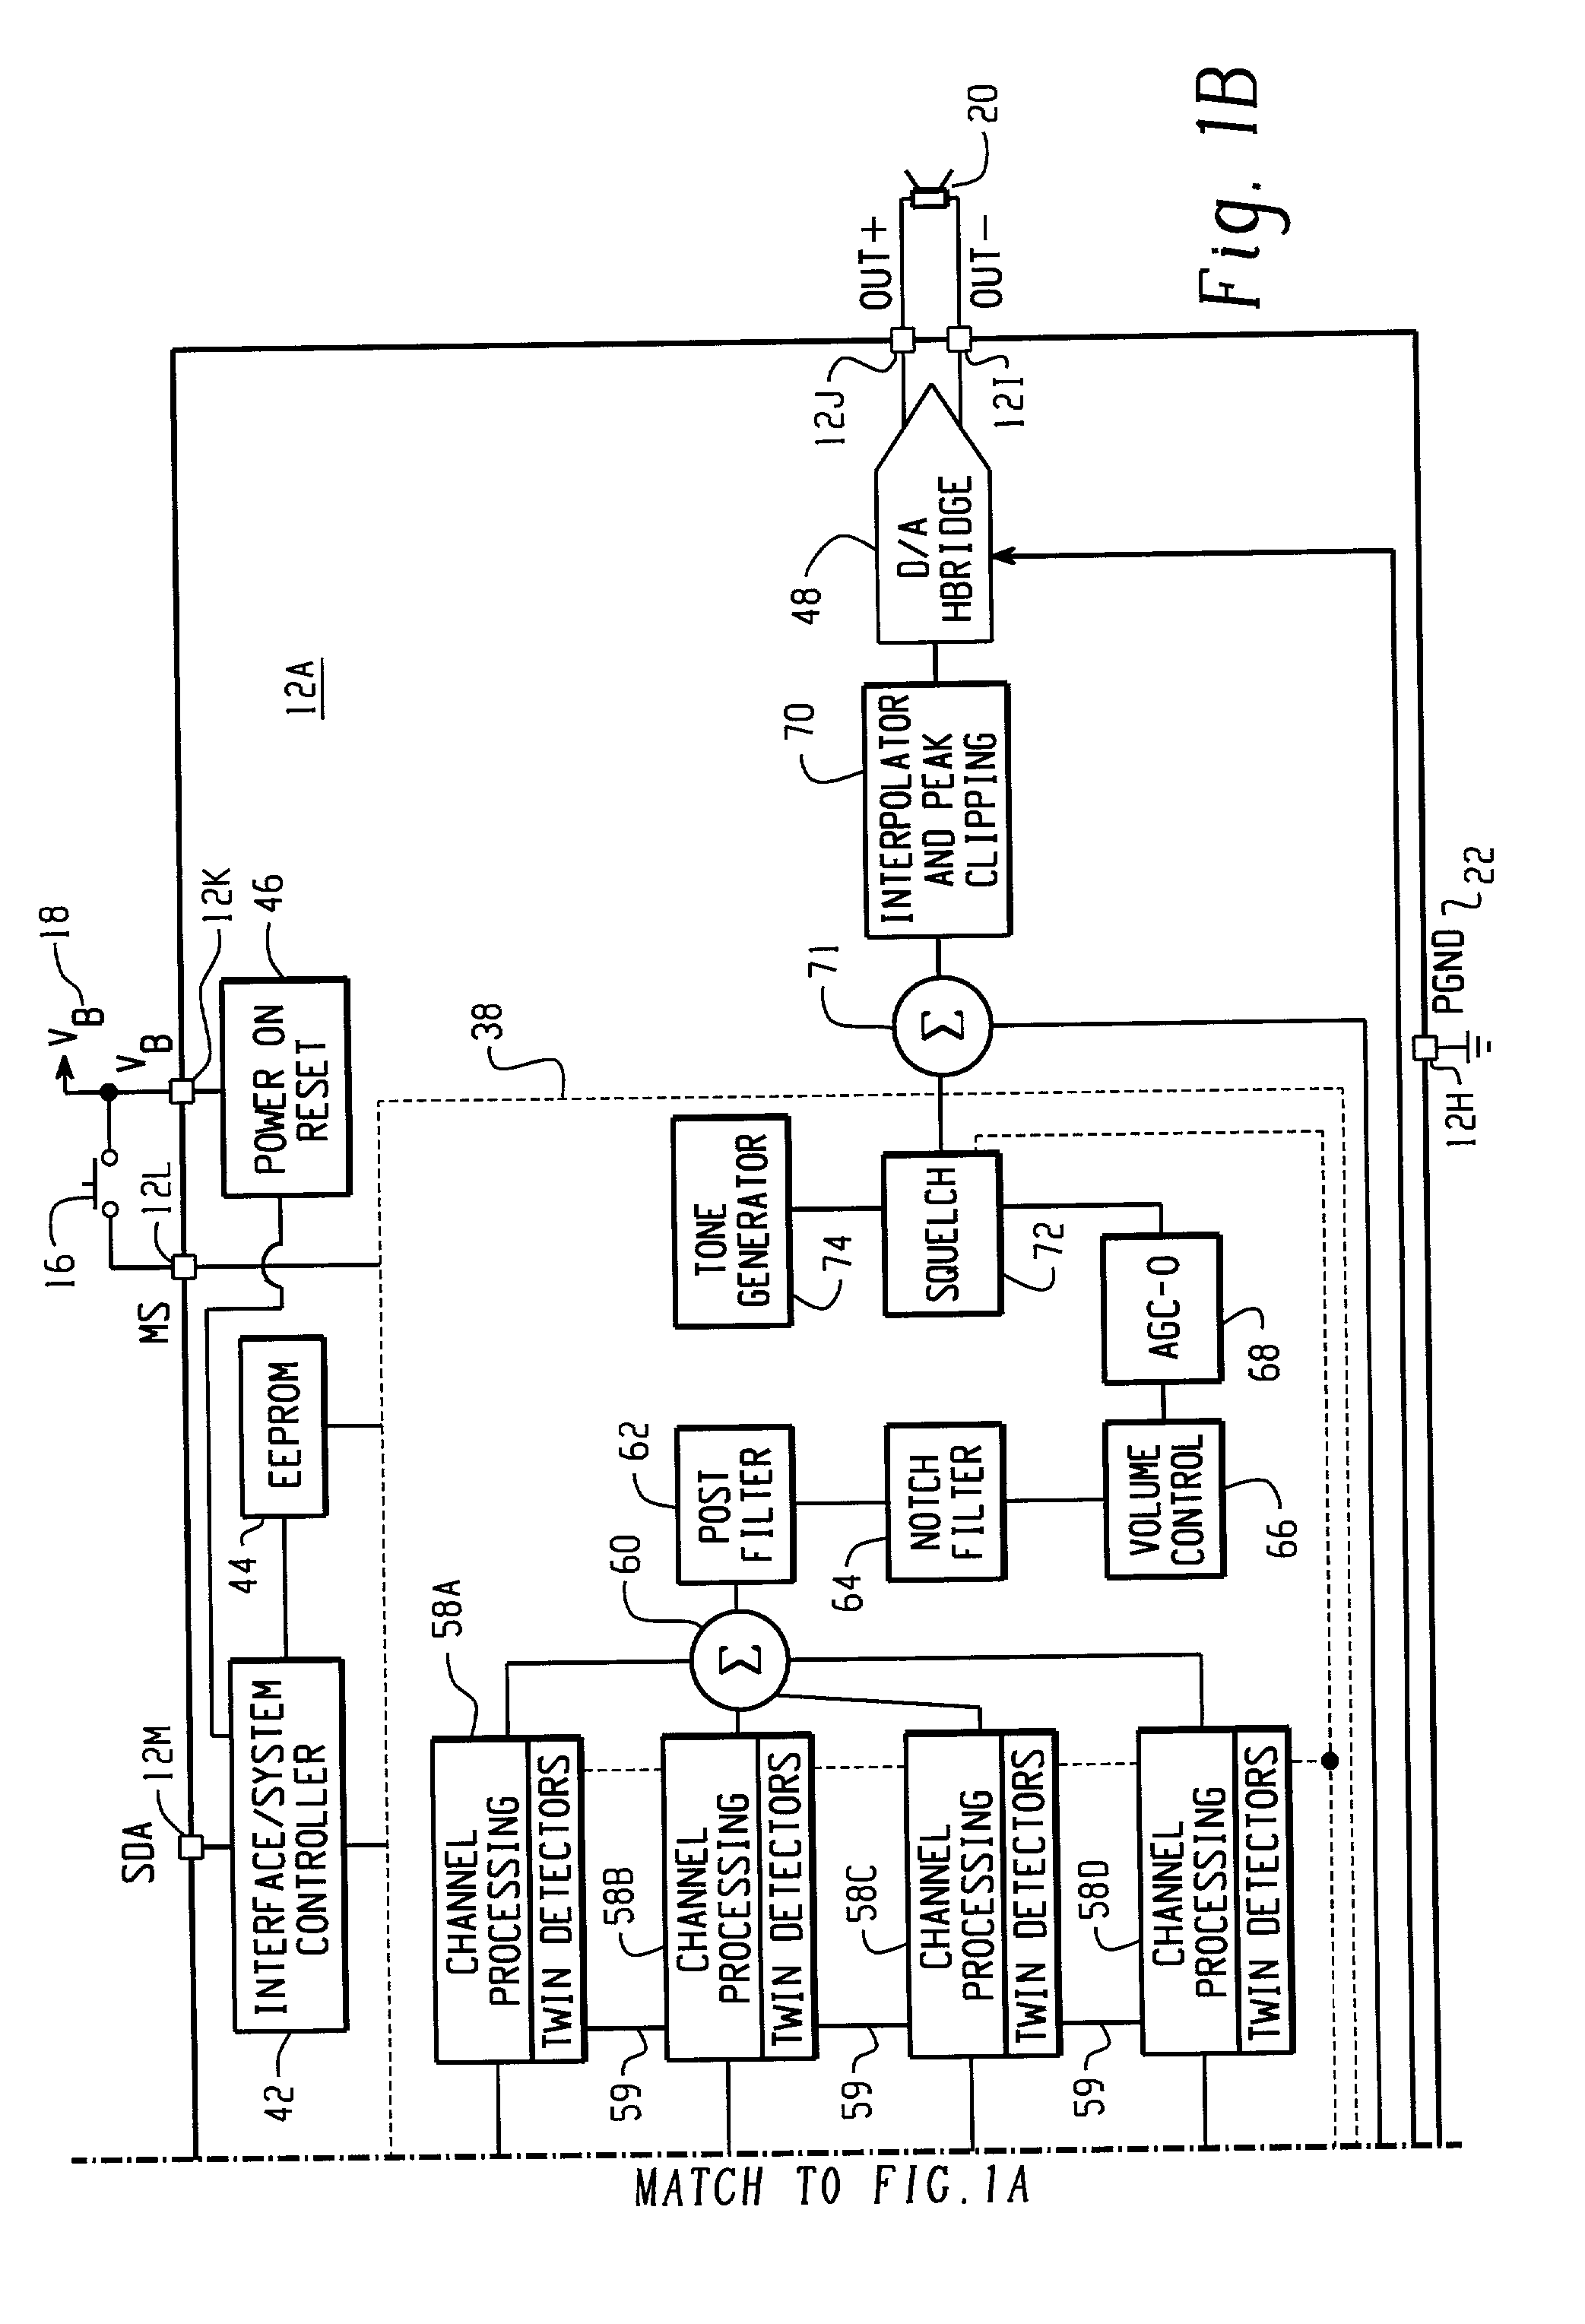 Inter-channel communication in a multi-channel digital hearing instrument